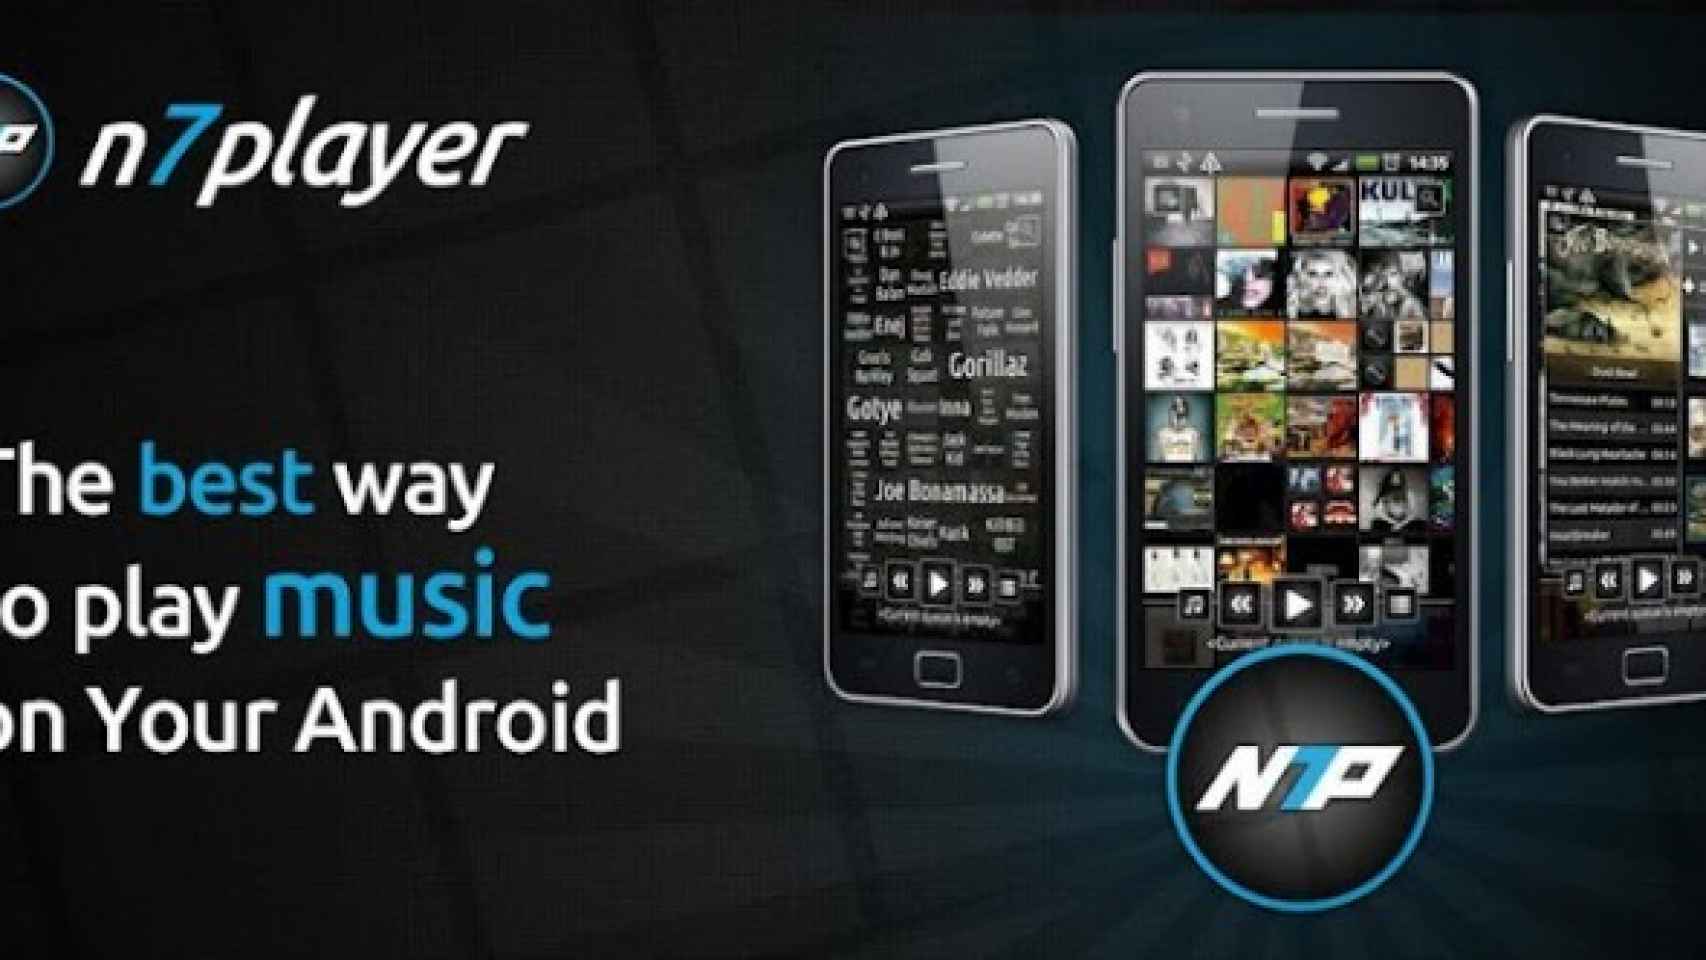 n7player excelente reproductor multimedia para Android.